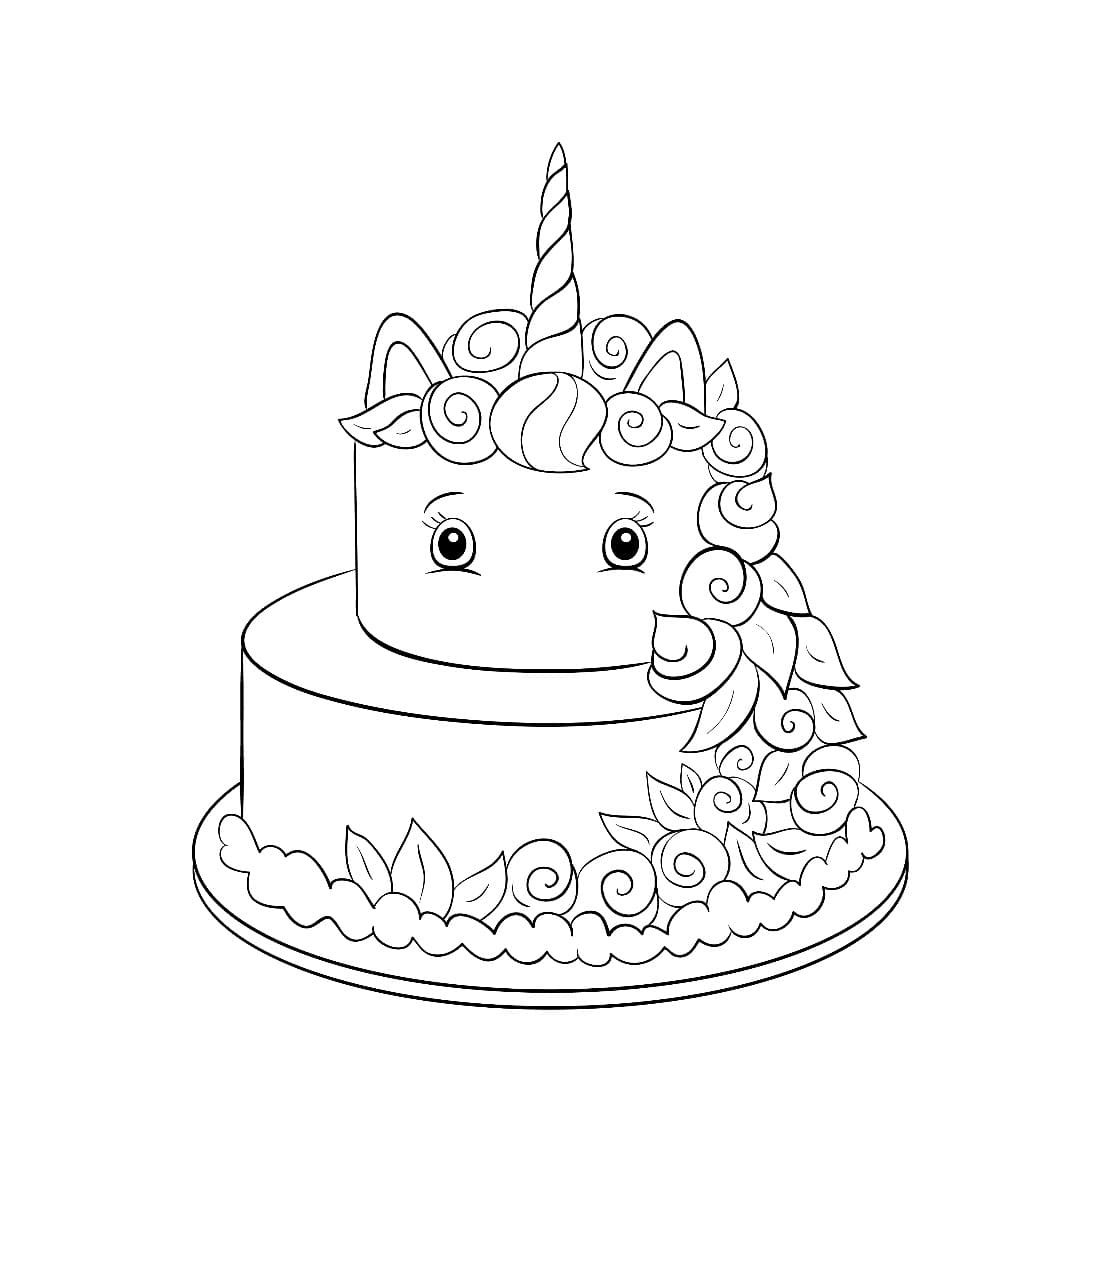 Cake Coloring Pages   20 images for Kids Free Printable